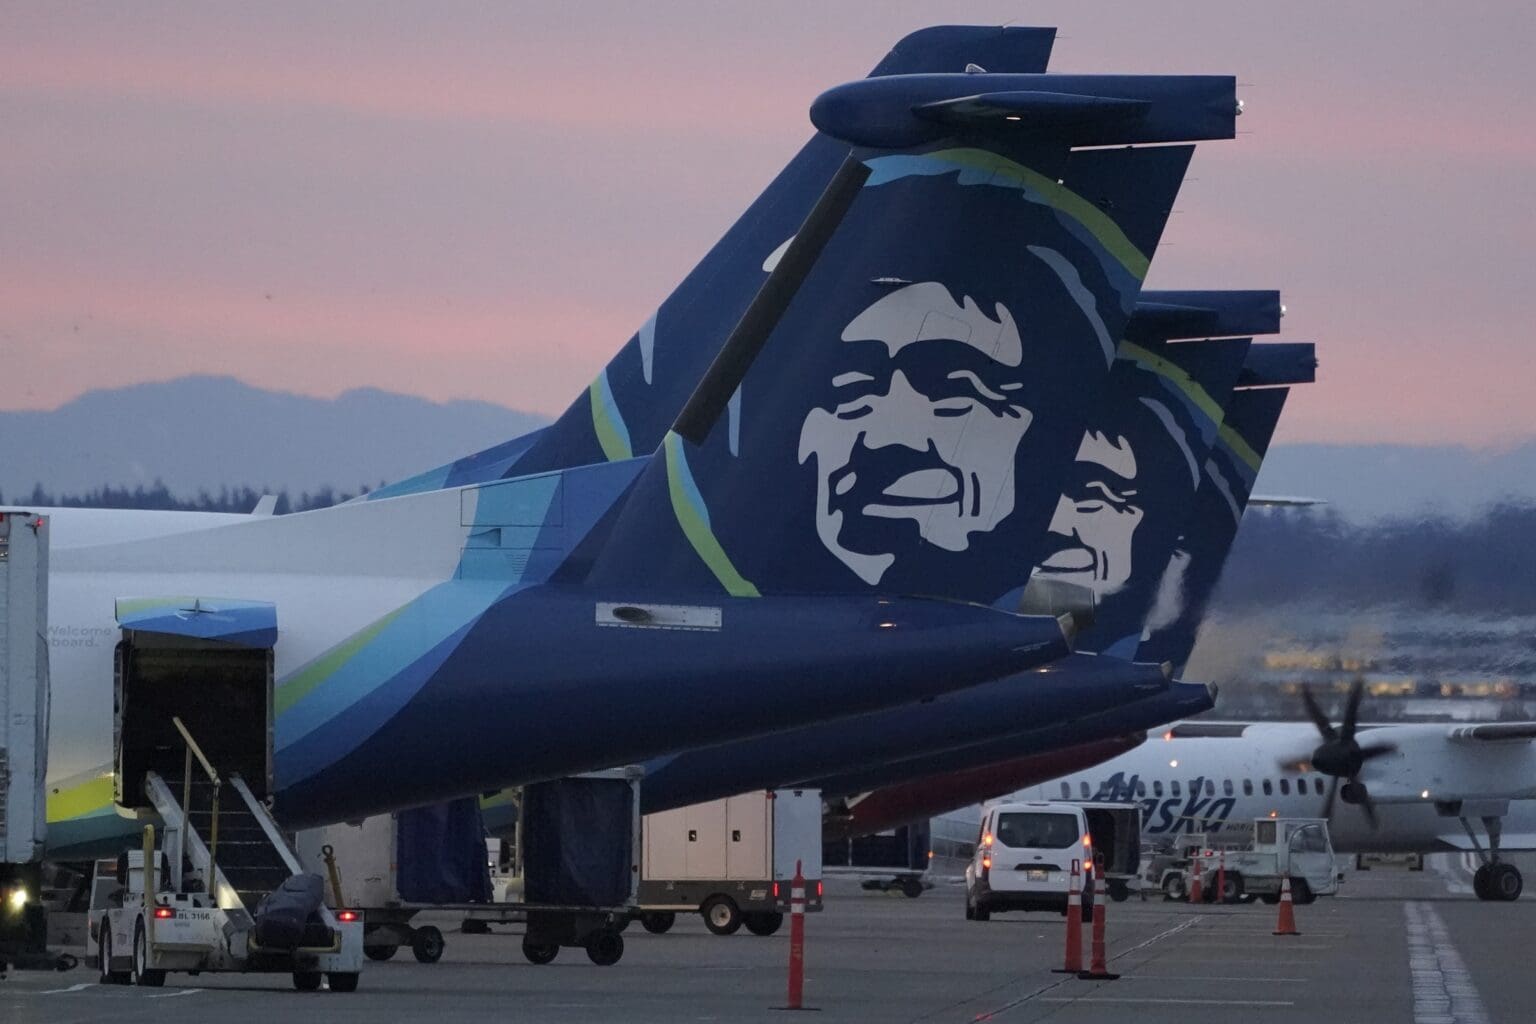 Alaska Airlines planes are shown parked at gates at sunrise